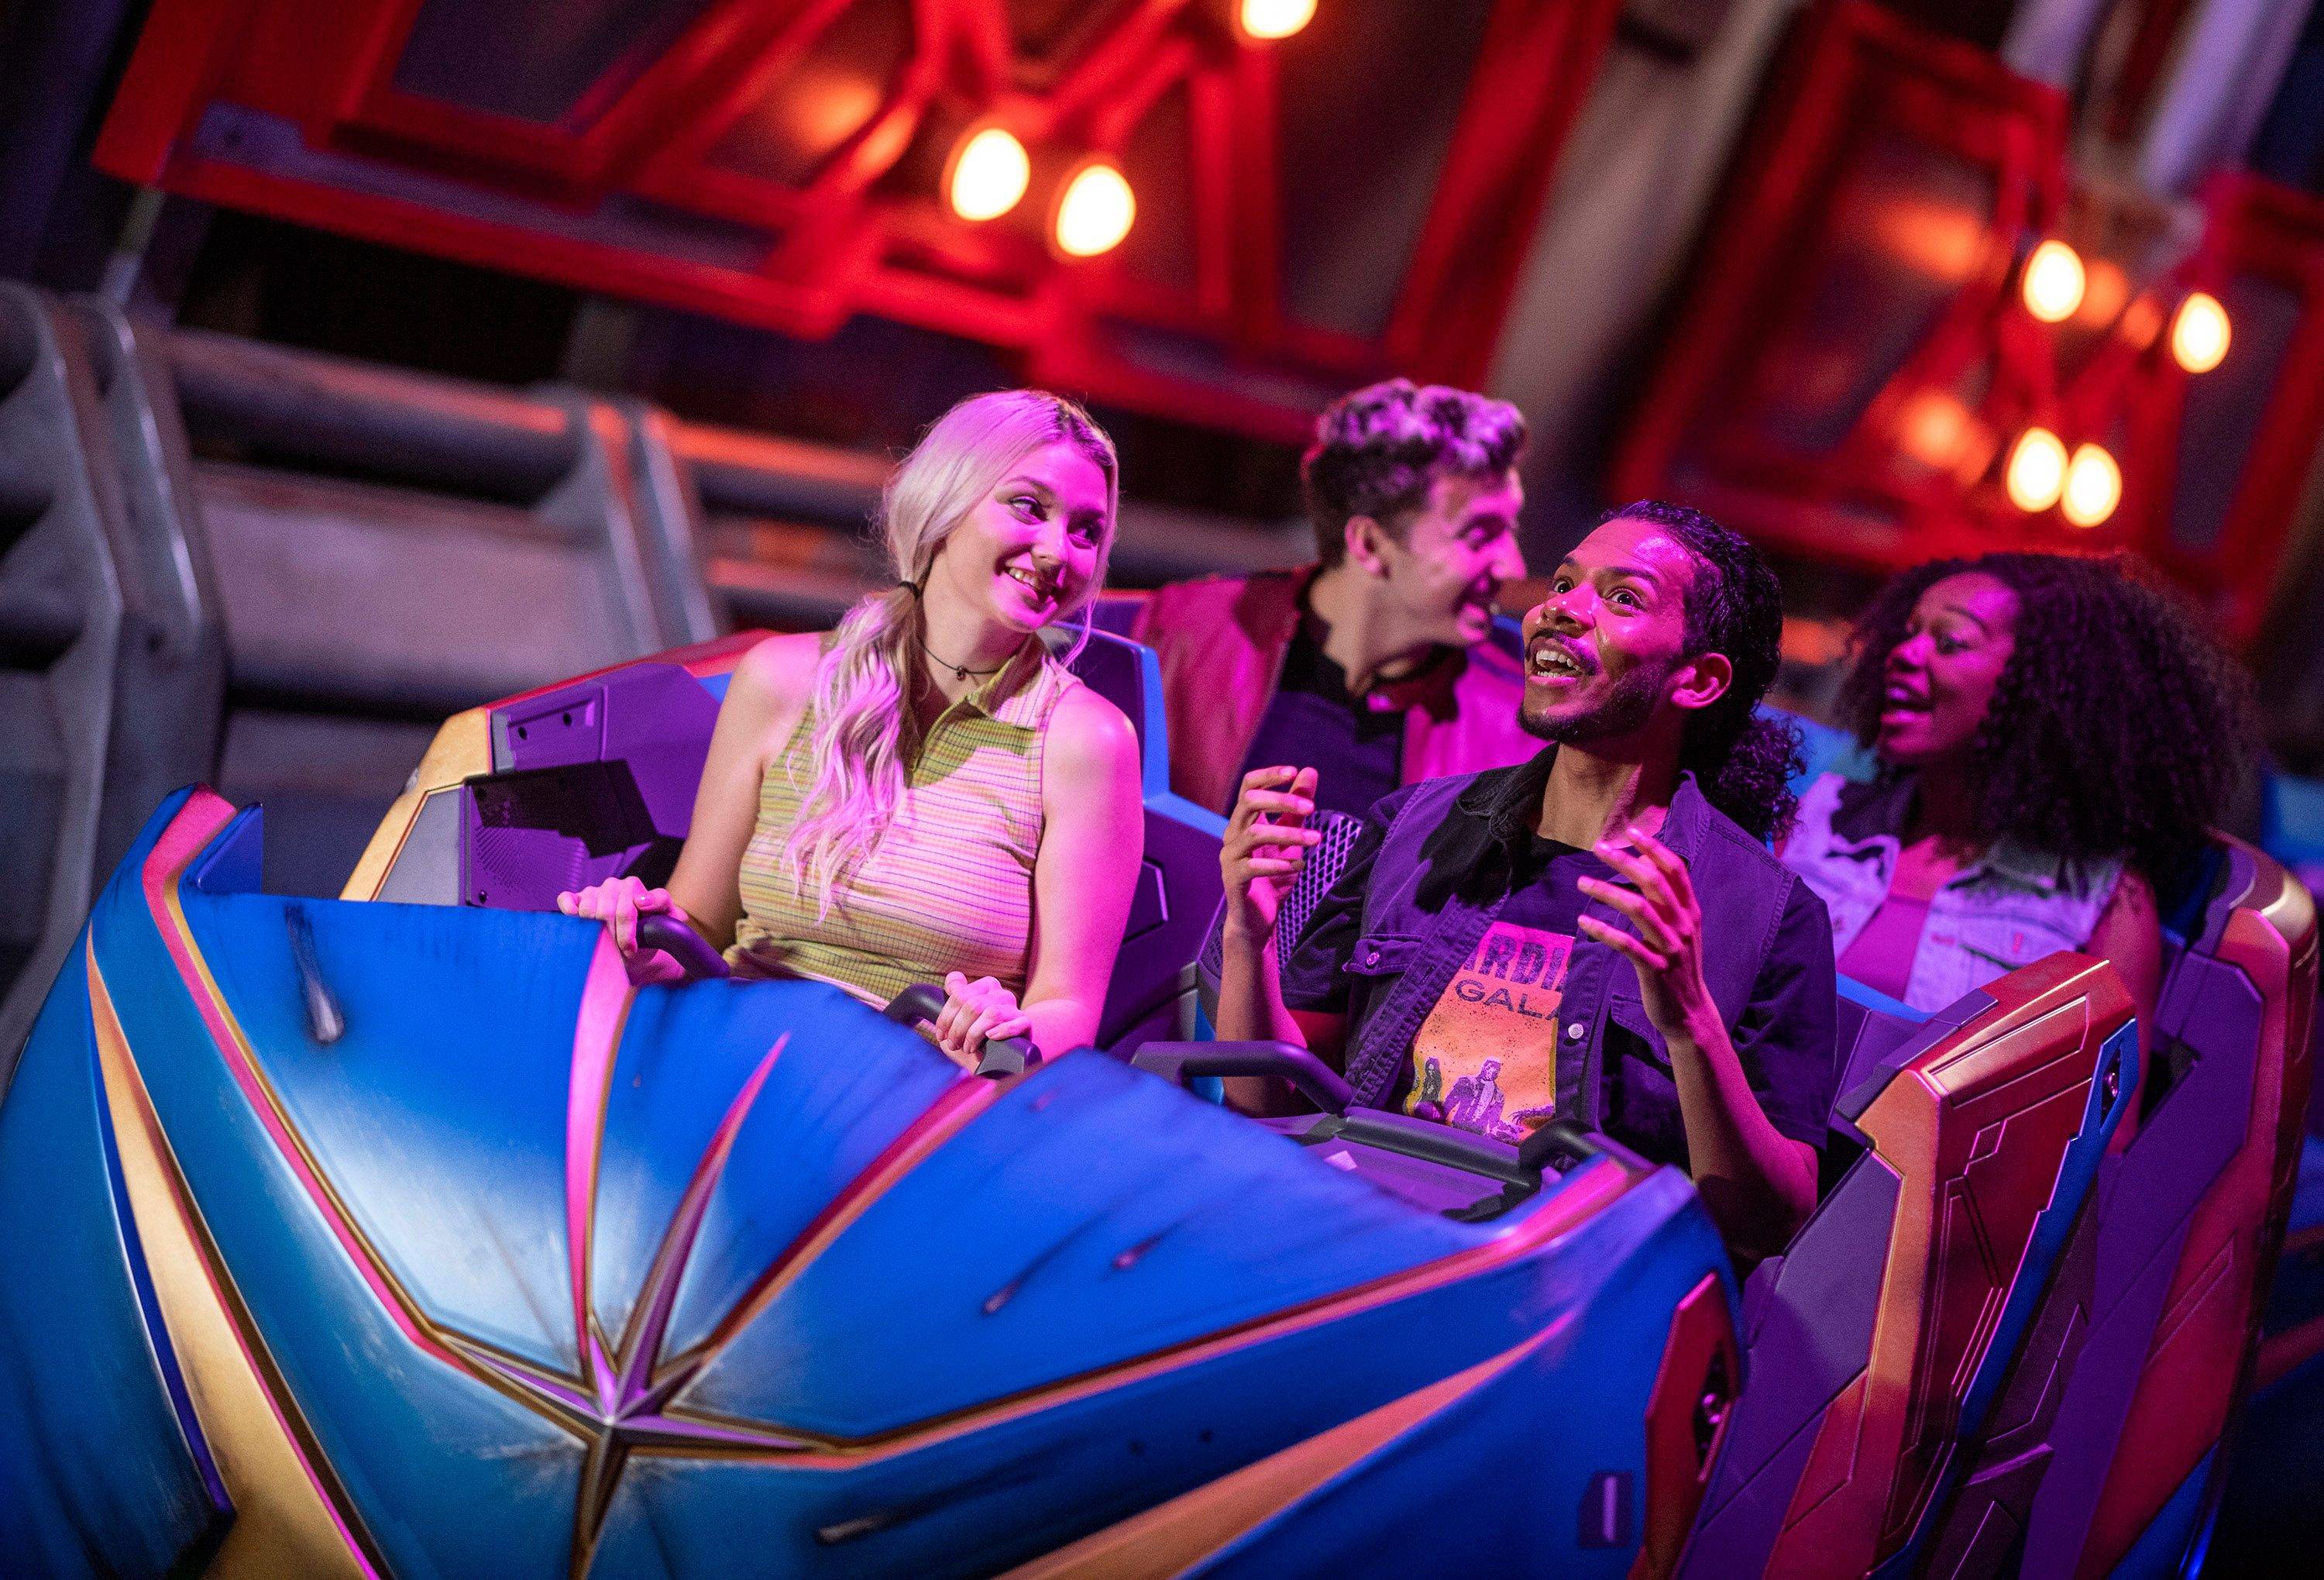 EPCOT guests board their Xandarian Starjumper in preparation for an intergalactic chase through time and space